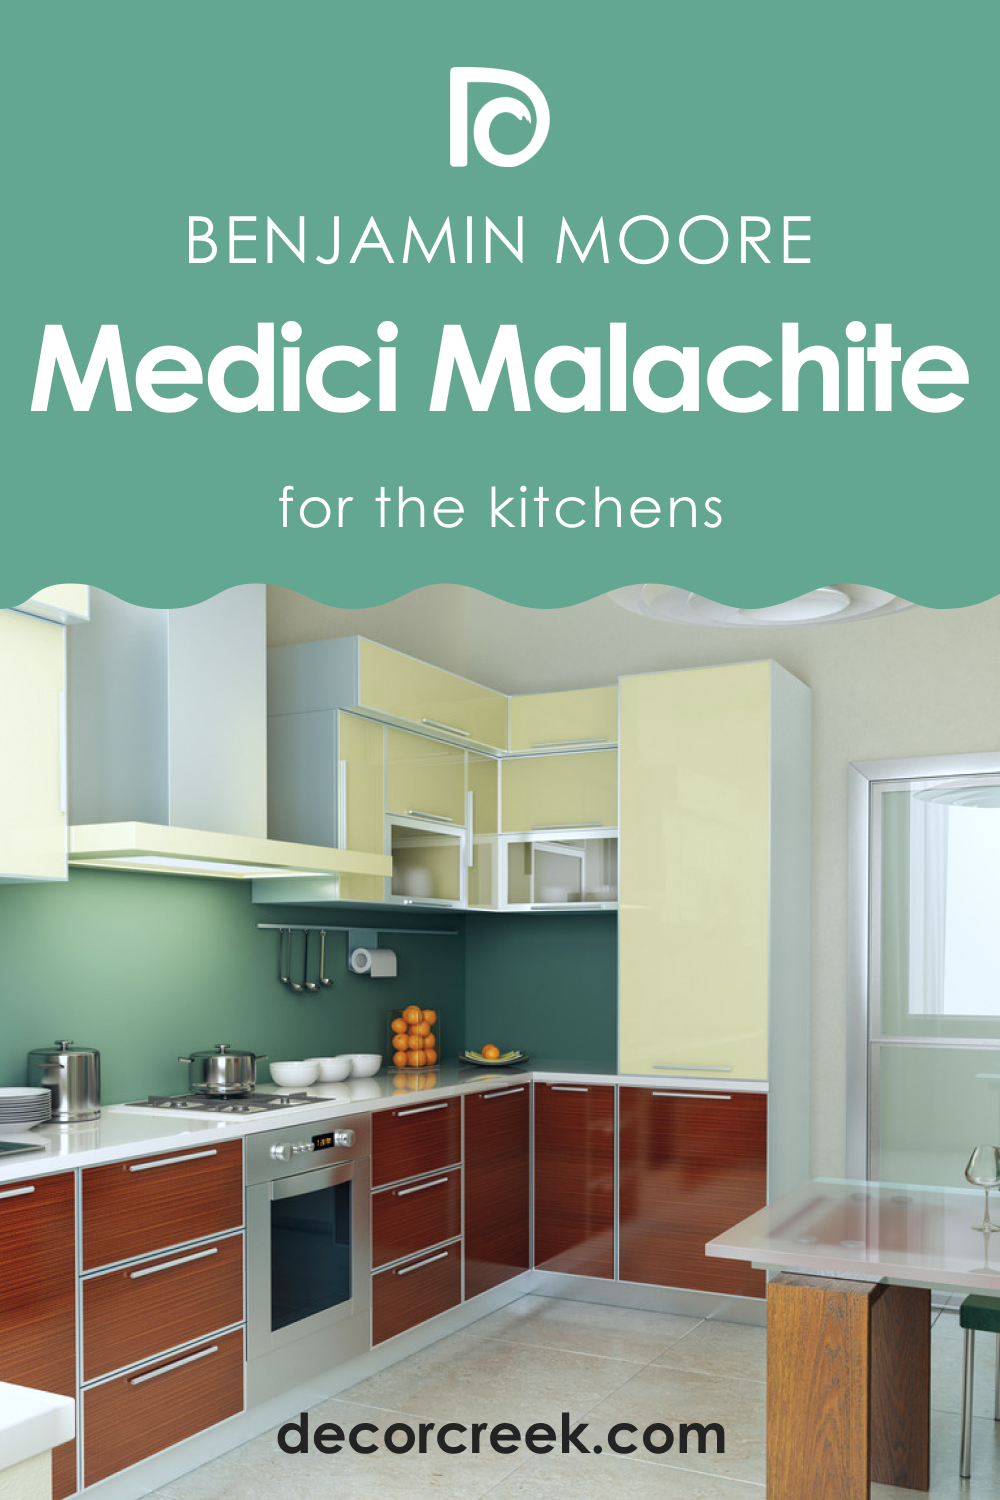 How to Use Medici Malachite 600 in the Kitchen?